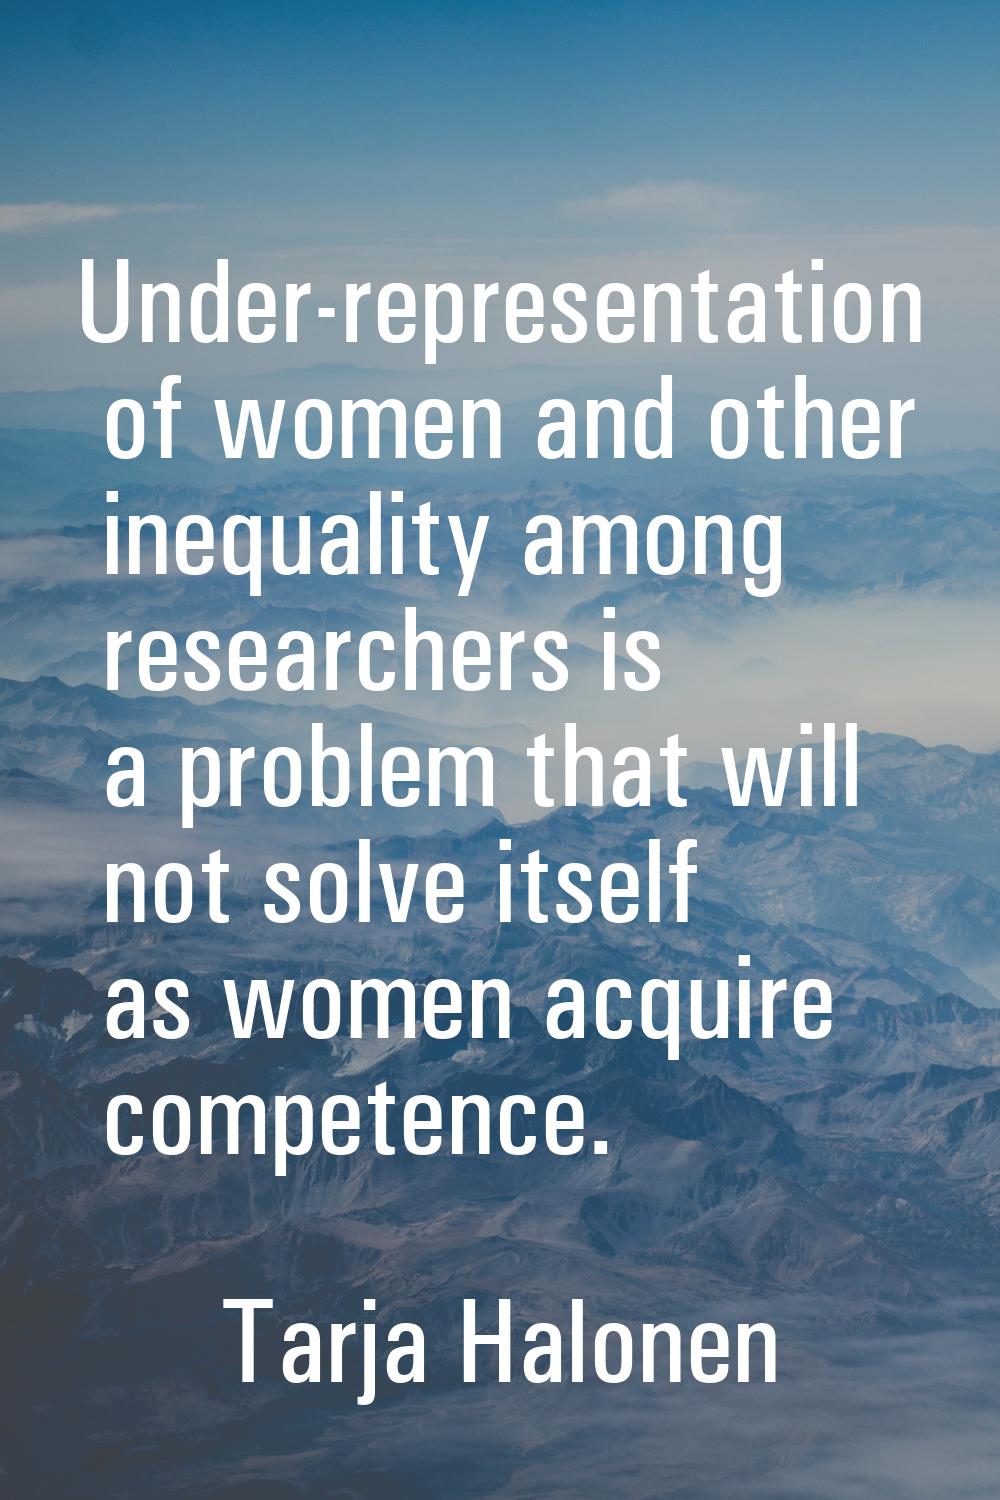 Under-representation of women and other inequality among researchers is a problem that will not sol